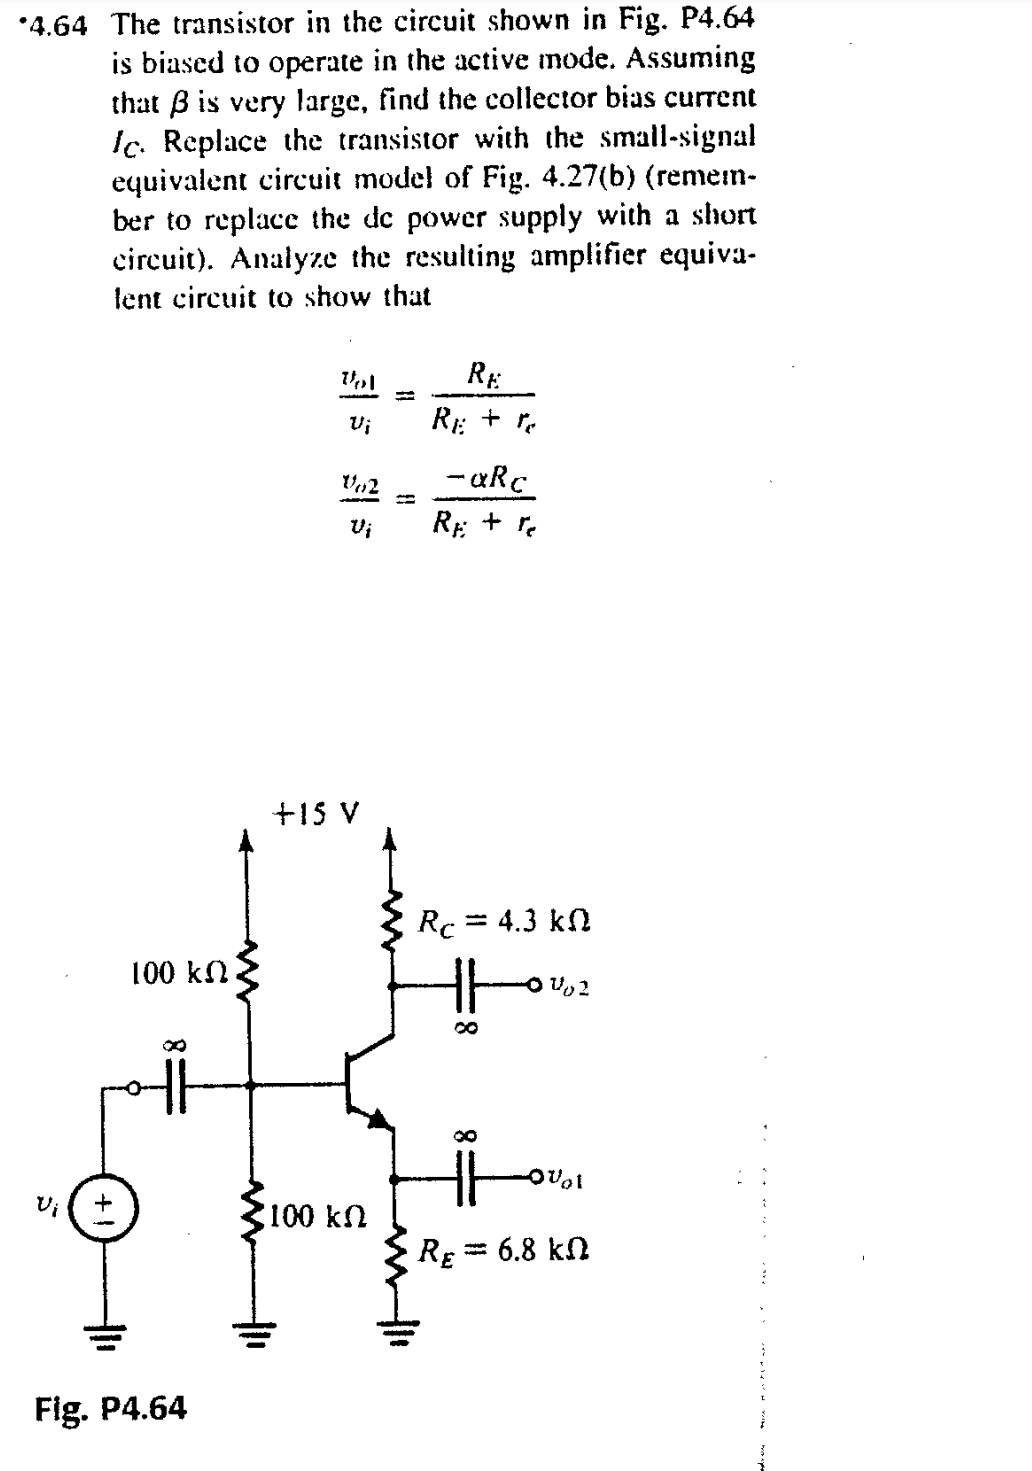 *4.64 The transistor in the circuit shown in Fig. P4.64
is biased to operate in the active mode. Assuming
that B is very large, find the collector bias current
Ic. Replace the transistor with the small-signal
equivalent circuit model of Fig. 4.27(b) (remen-
ber to replace the de power supply with a short
circuit). Analyze the resulting amplifier equiva-
lent circuit to show that
RE
%3D
Vi
R: + r.
- «Rc
Vi
RE +
+15 V
Rc = 4.3 kn
100 kN
8.
Vi
100 kn
RE = 6.8 kn
Fig. P4.64
